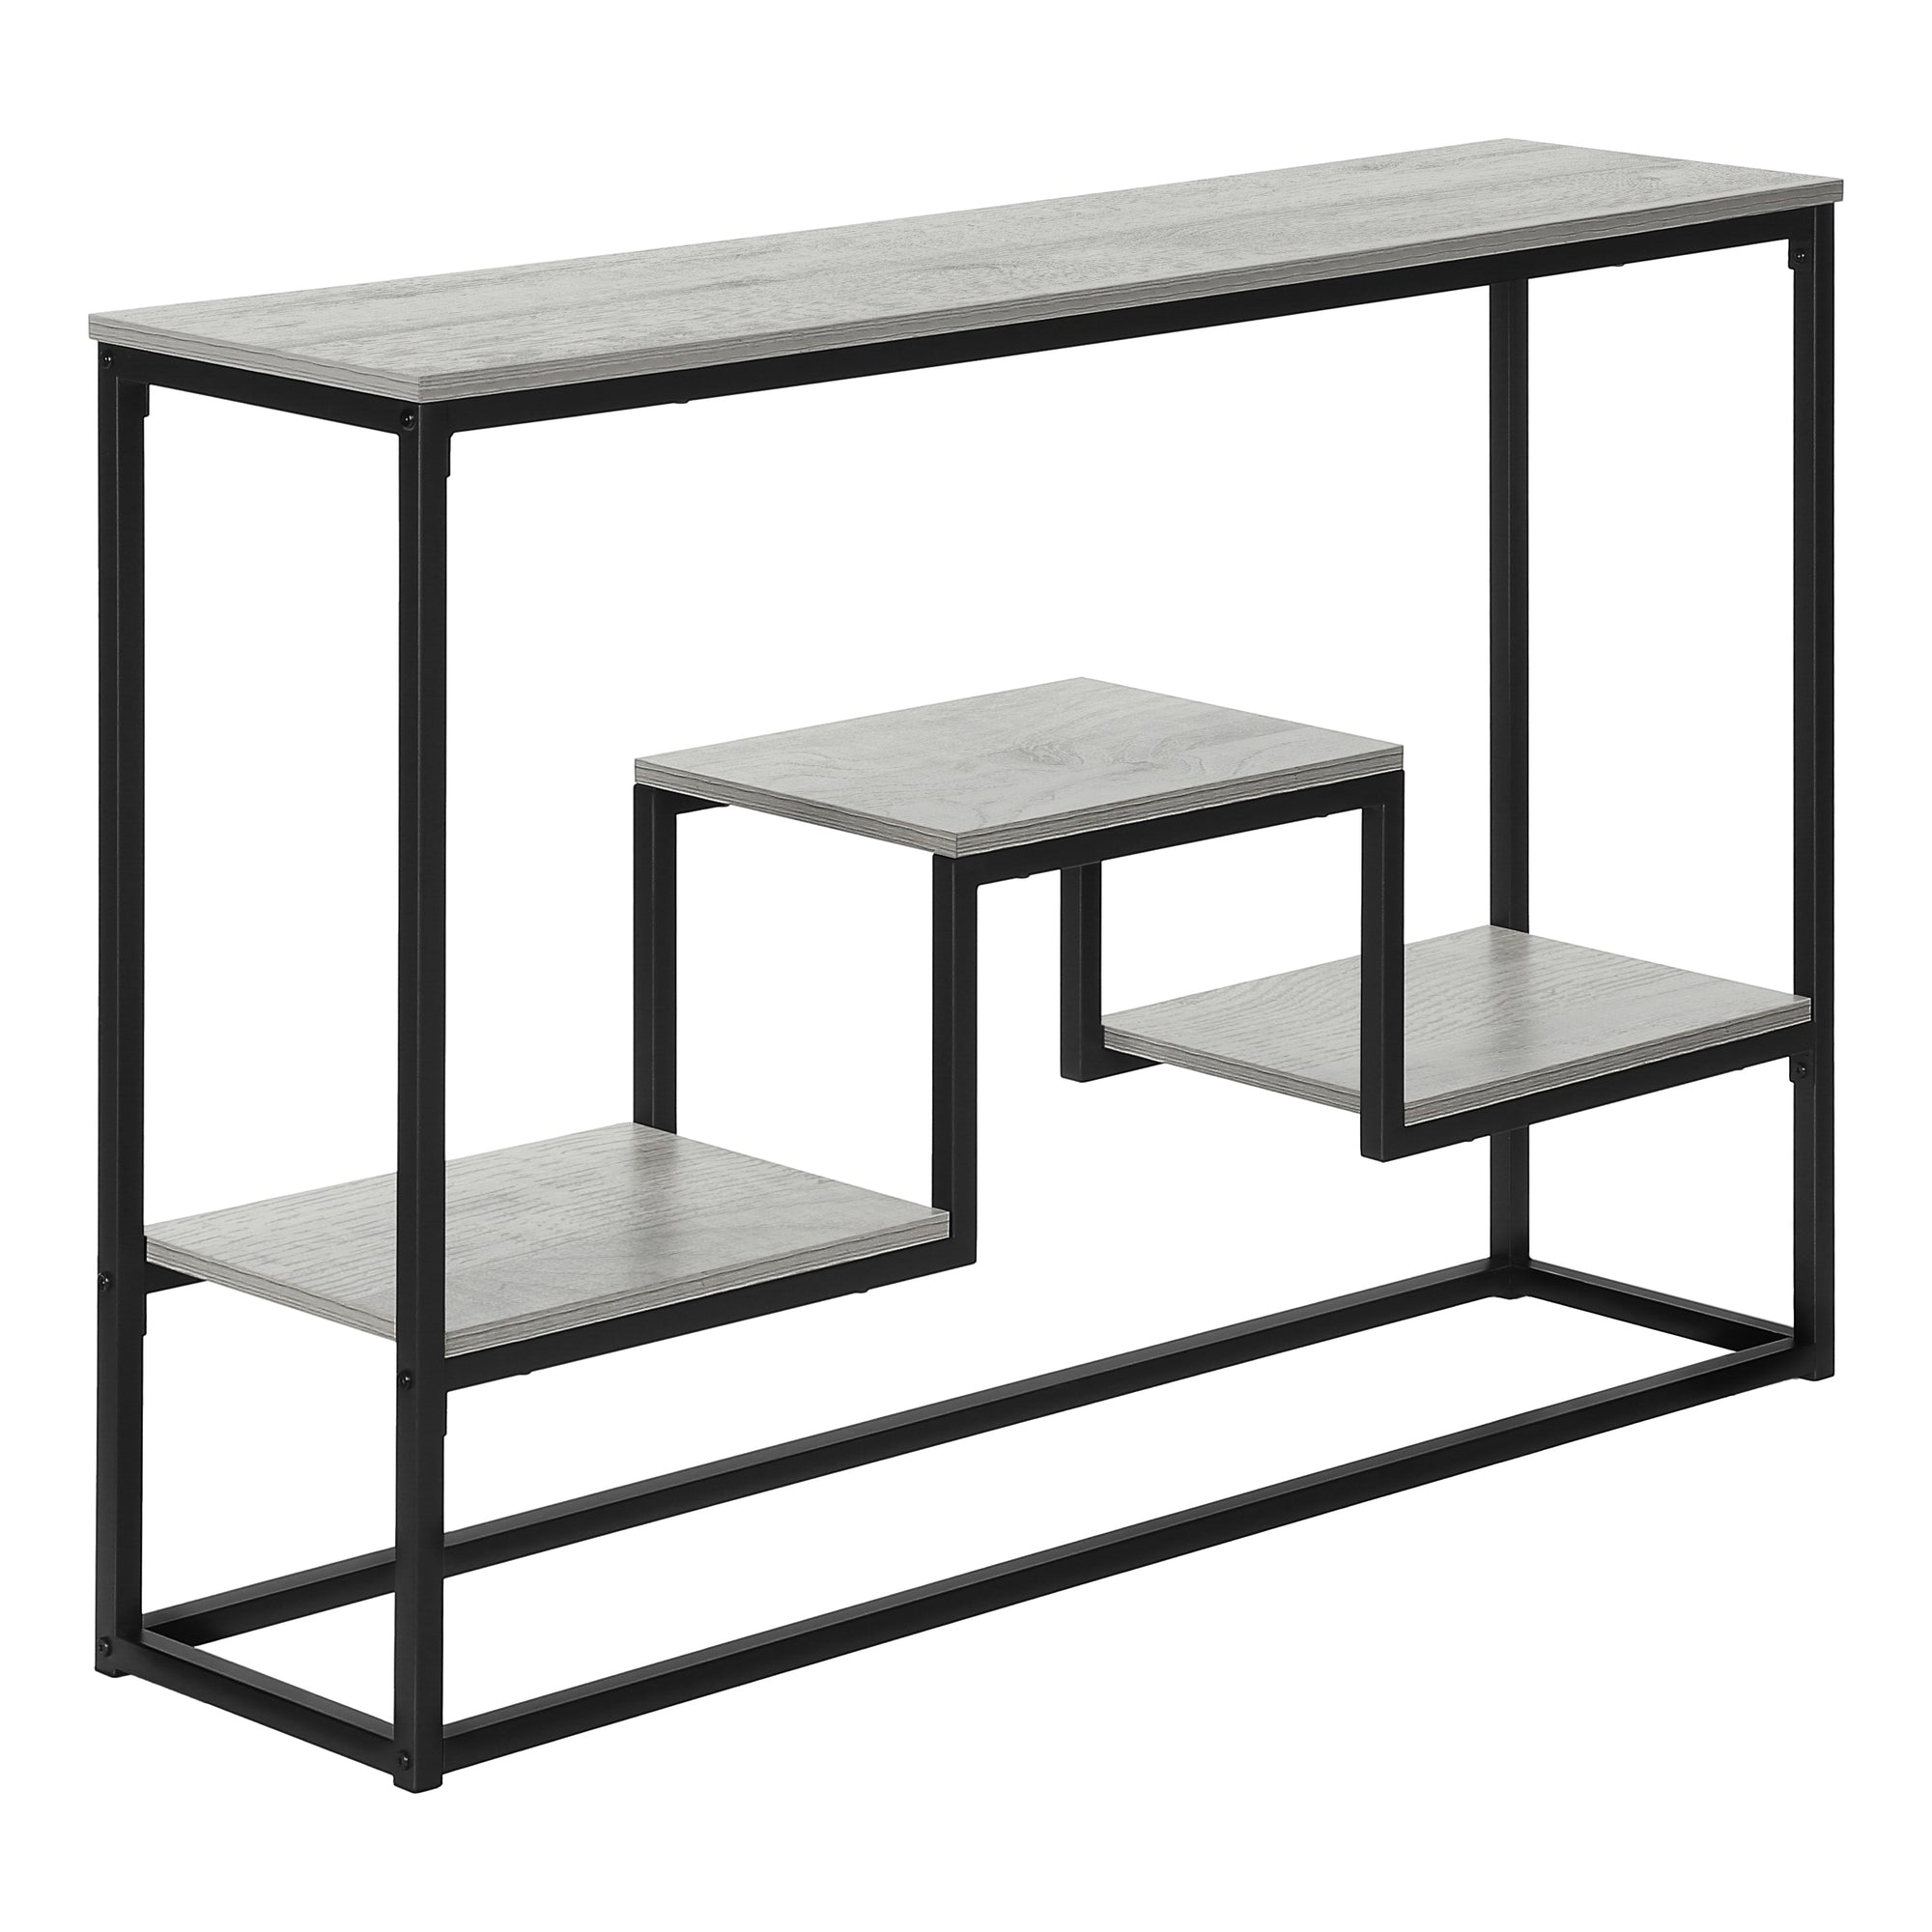 ACCENT TABLE - 48"L / BLACK MARBLE / BLACK METAL CONSOLE